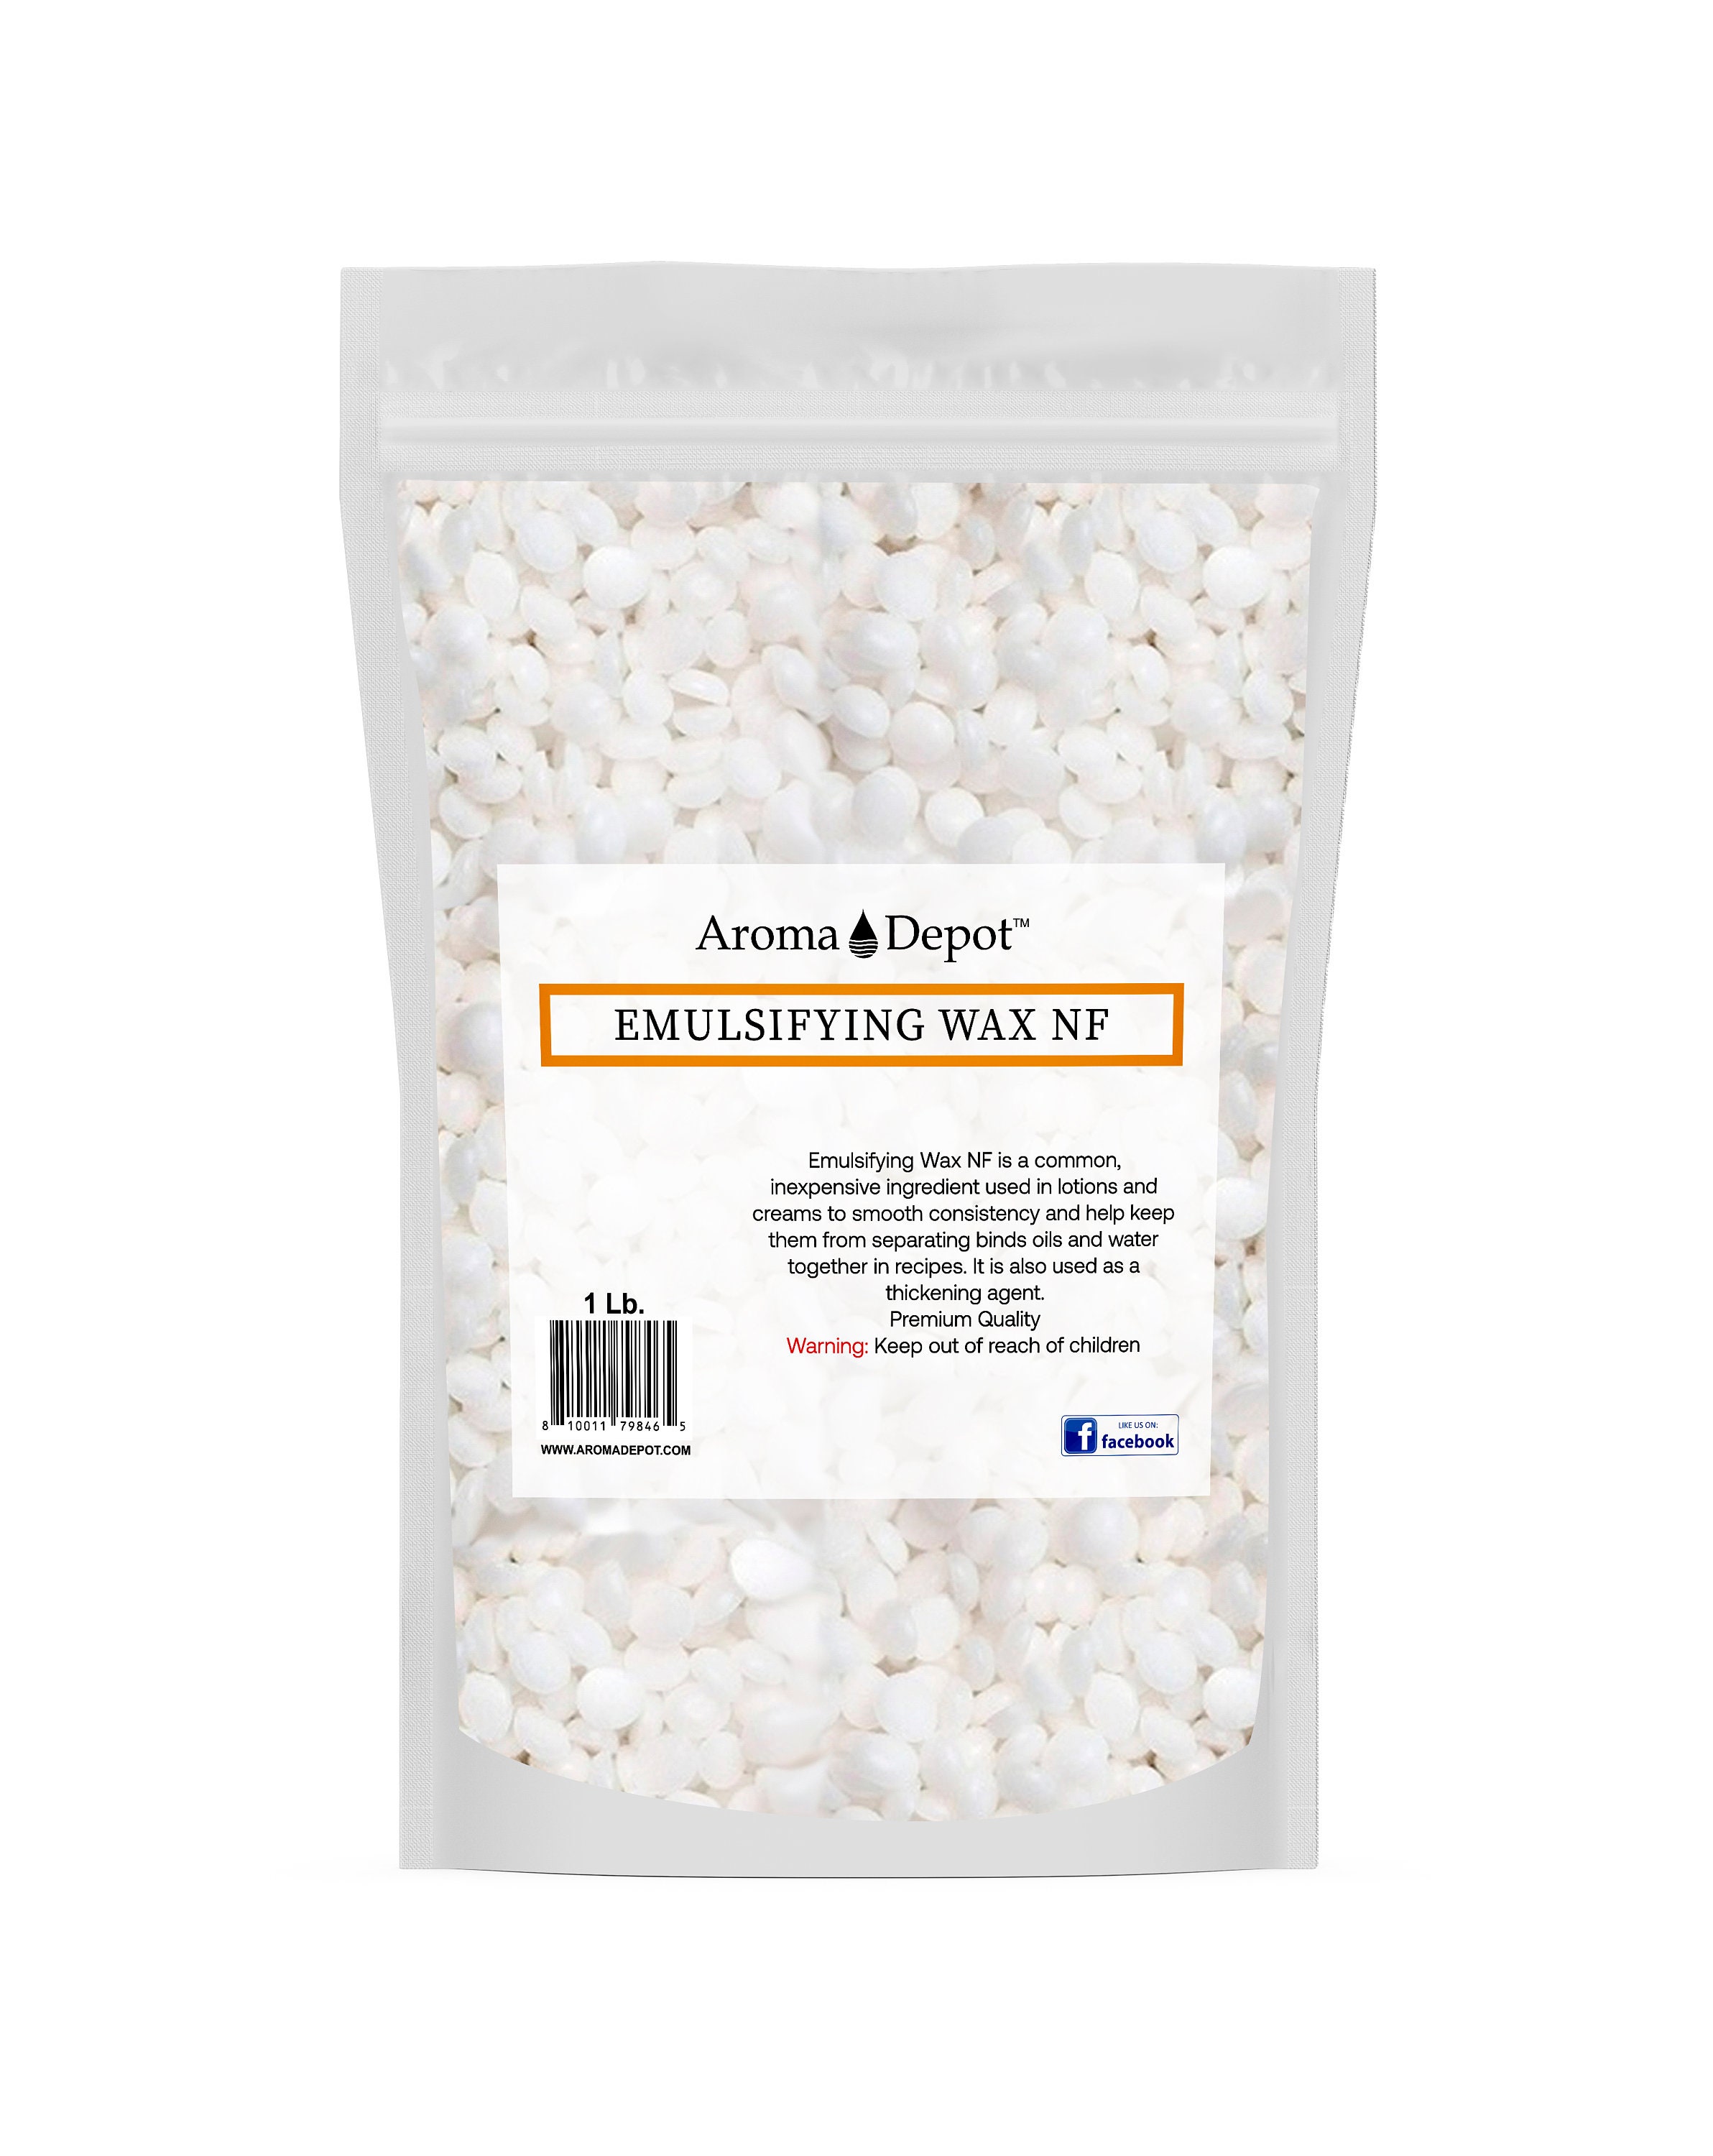 16 OZ / 1 LBS EMULSIFYING WAX NF POLYSORBATE 60 PURE POLAWAX 100% PURE  Vegetable Derived Non-toxic 100% Wax pellets